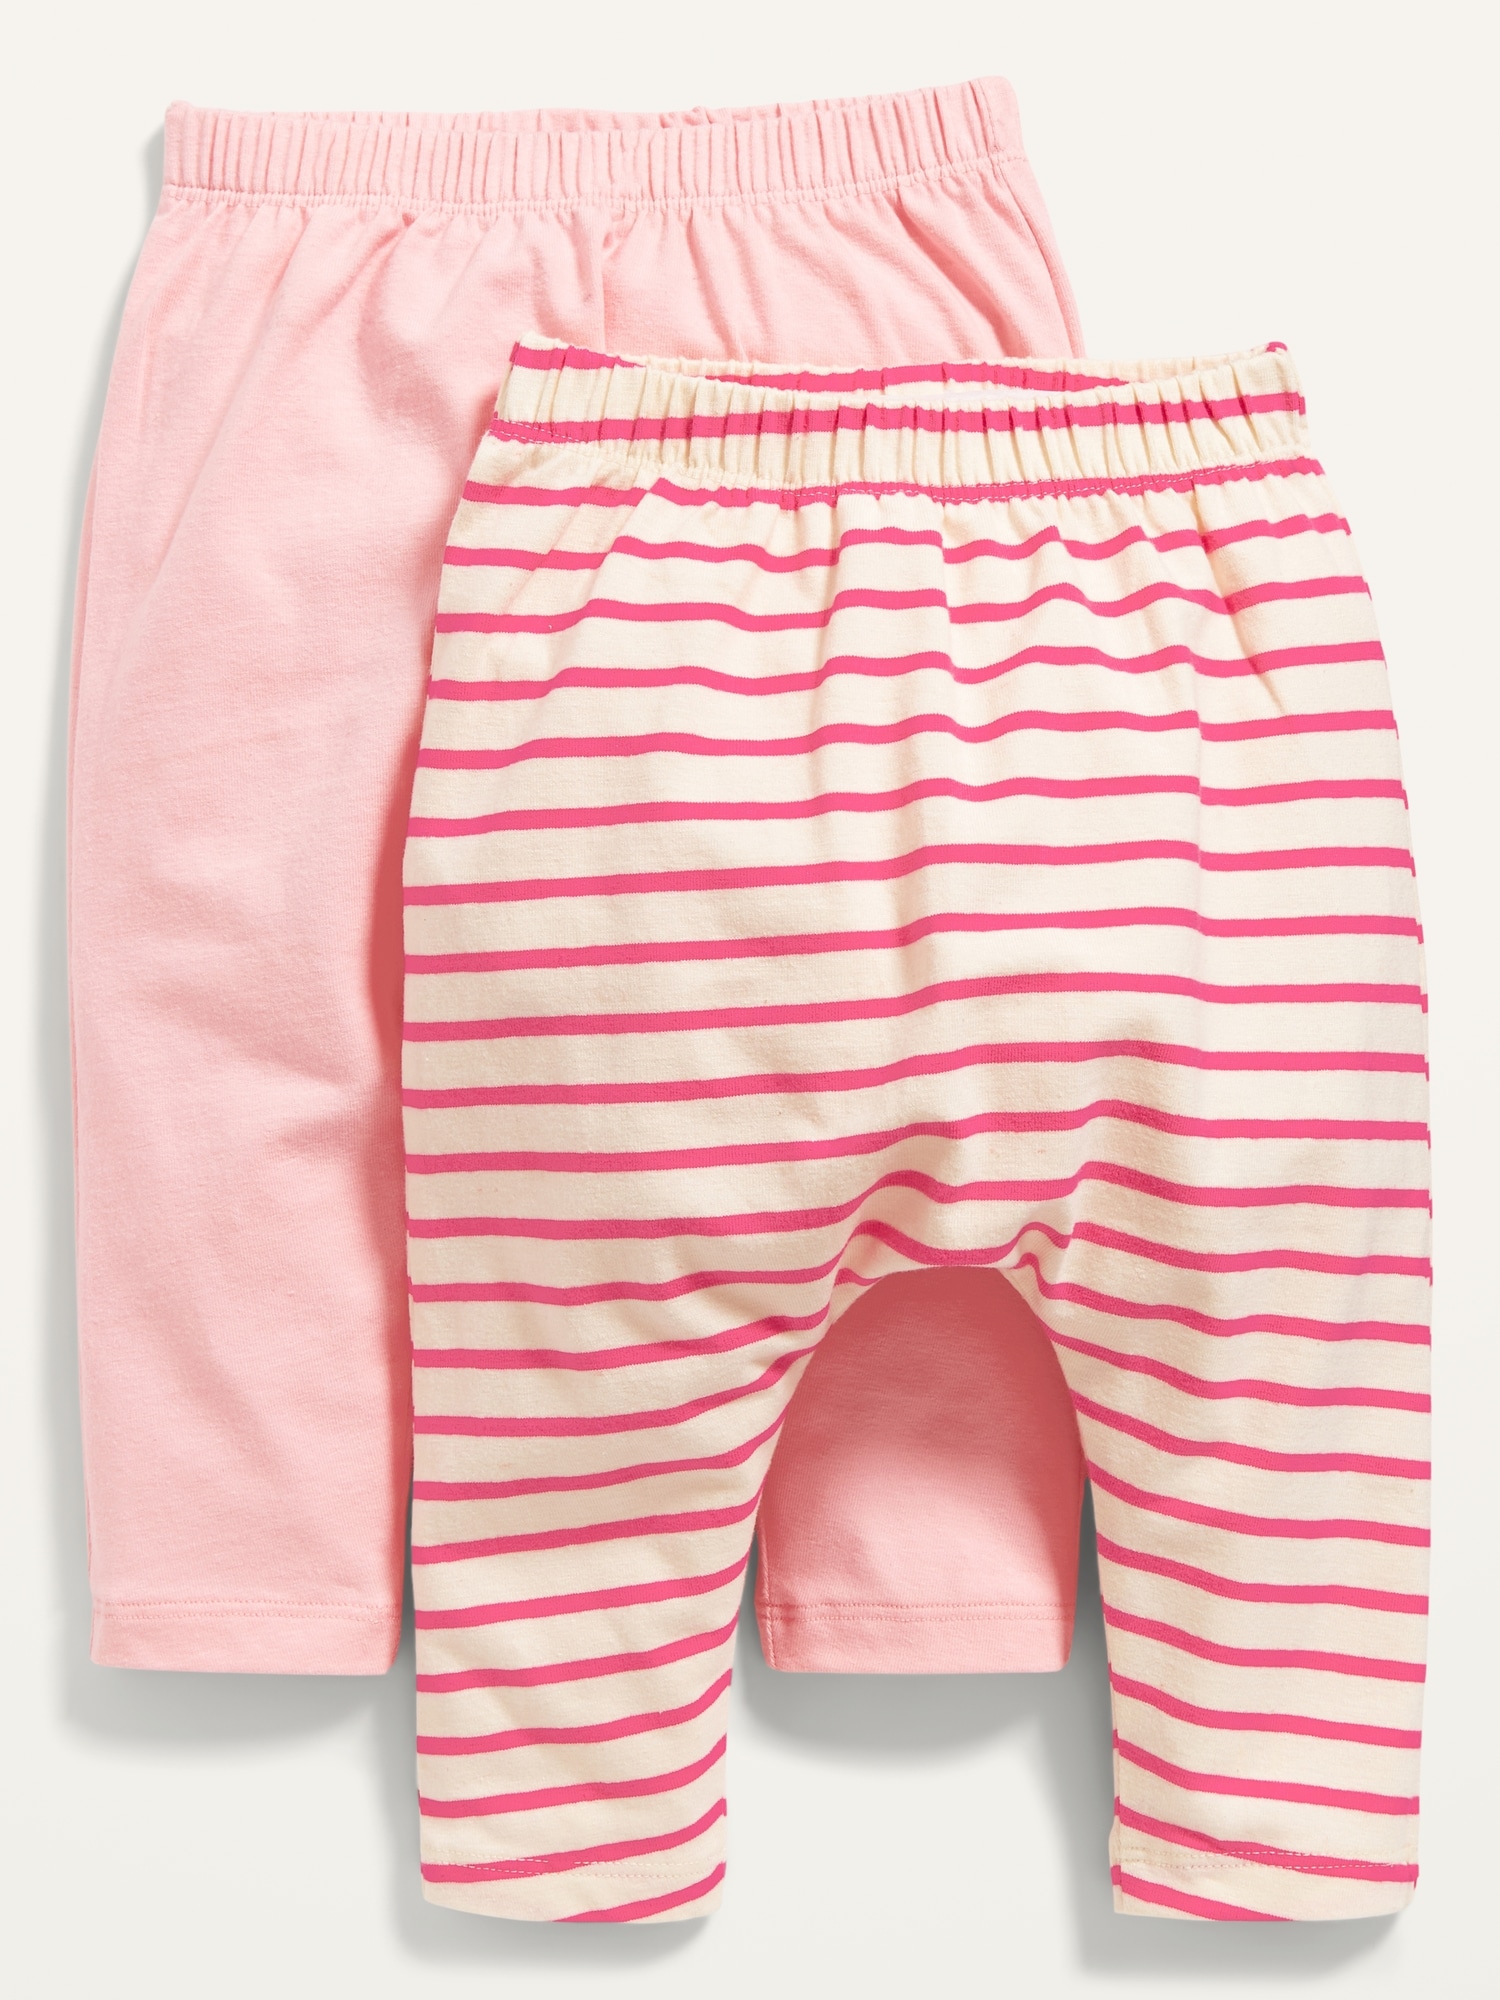 Unisex 2-Pack U-Shaped Jersey Pants for Baby